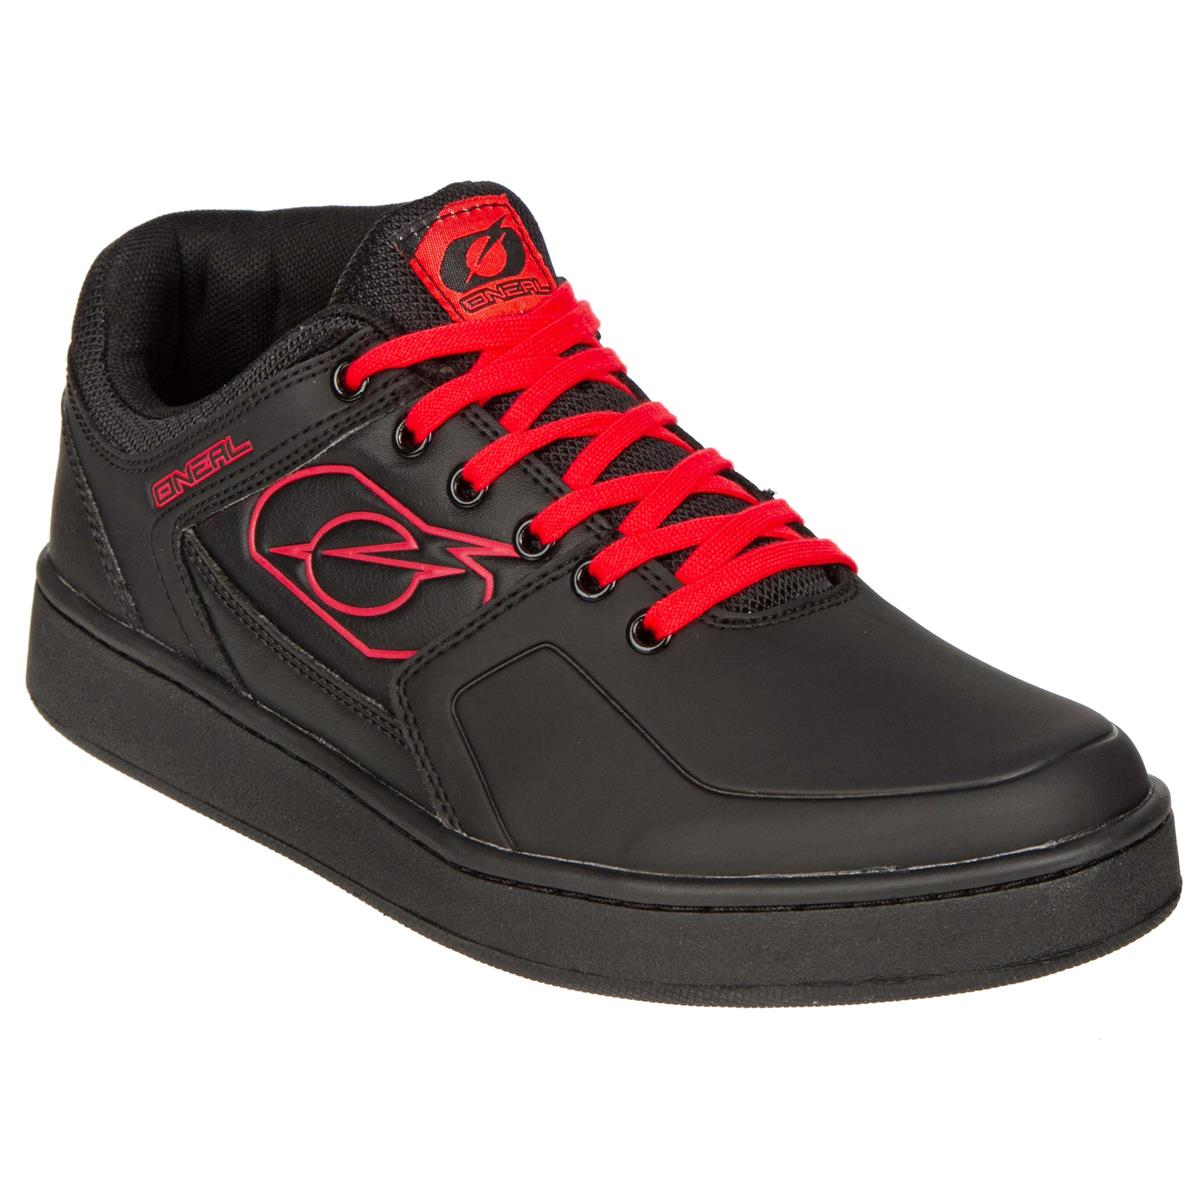 O'Neal Chaussures VTT Pinned Pro Red